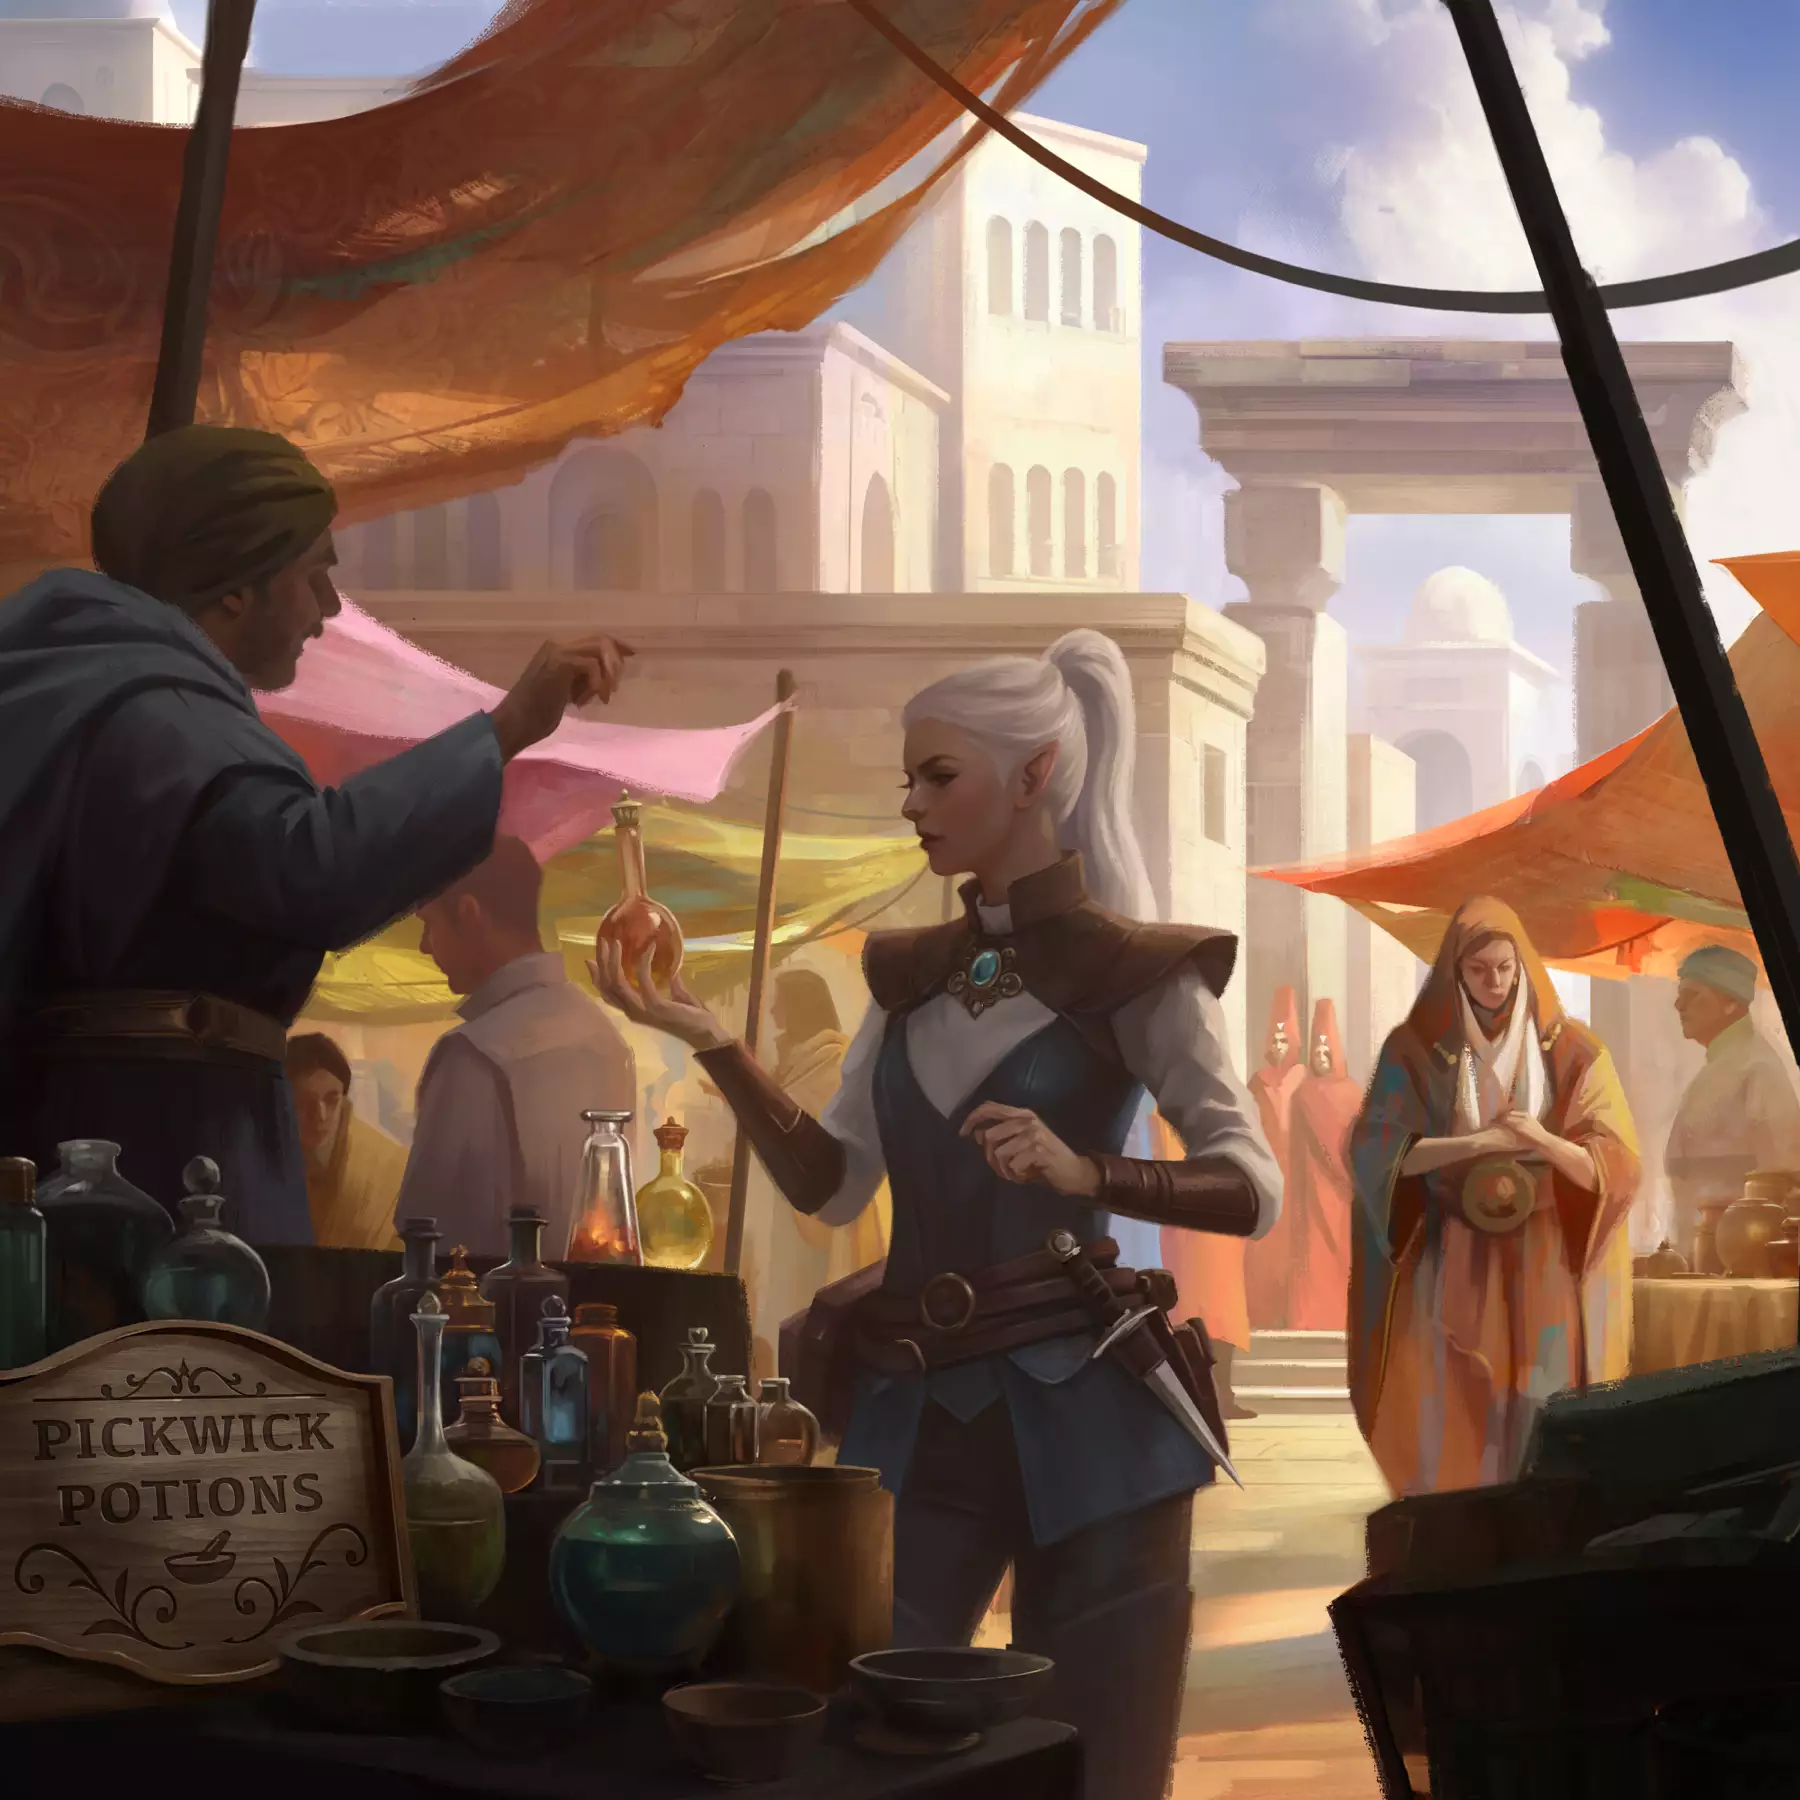 An elven adventurer browses a potion stall and haggles with the proprietor.